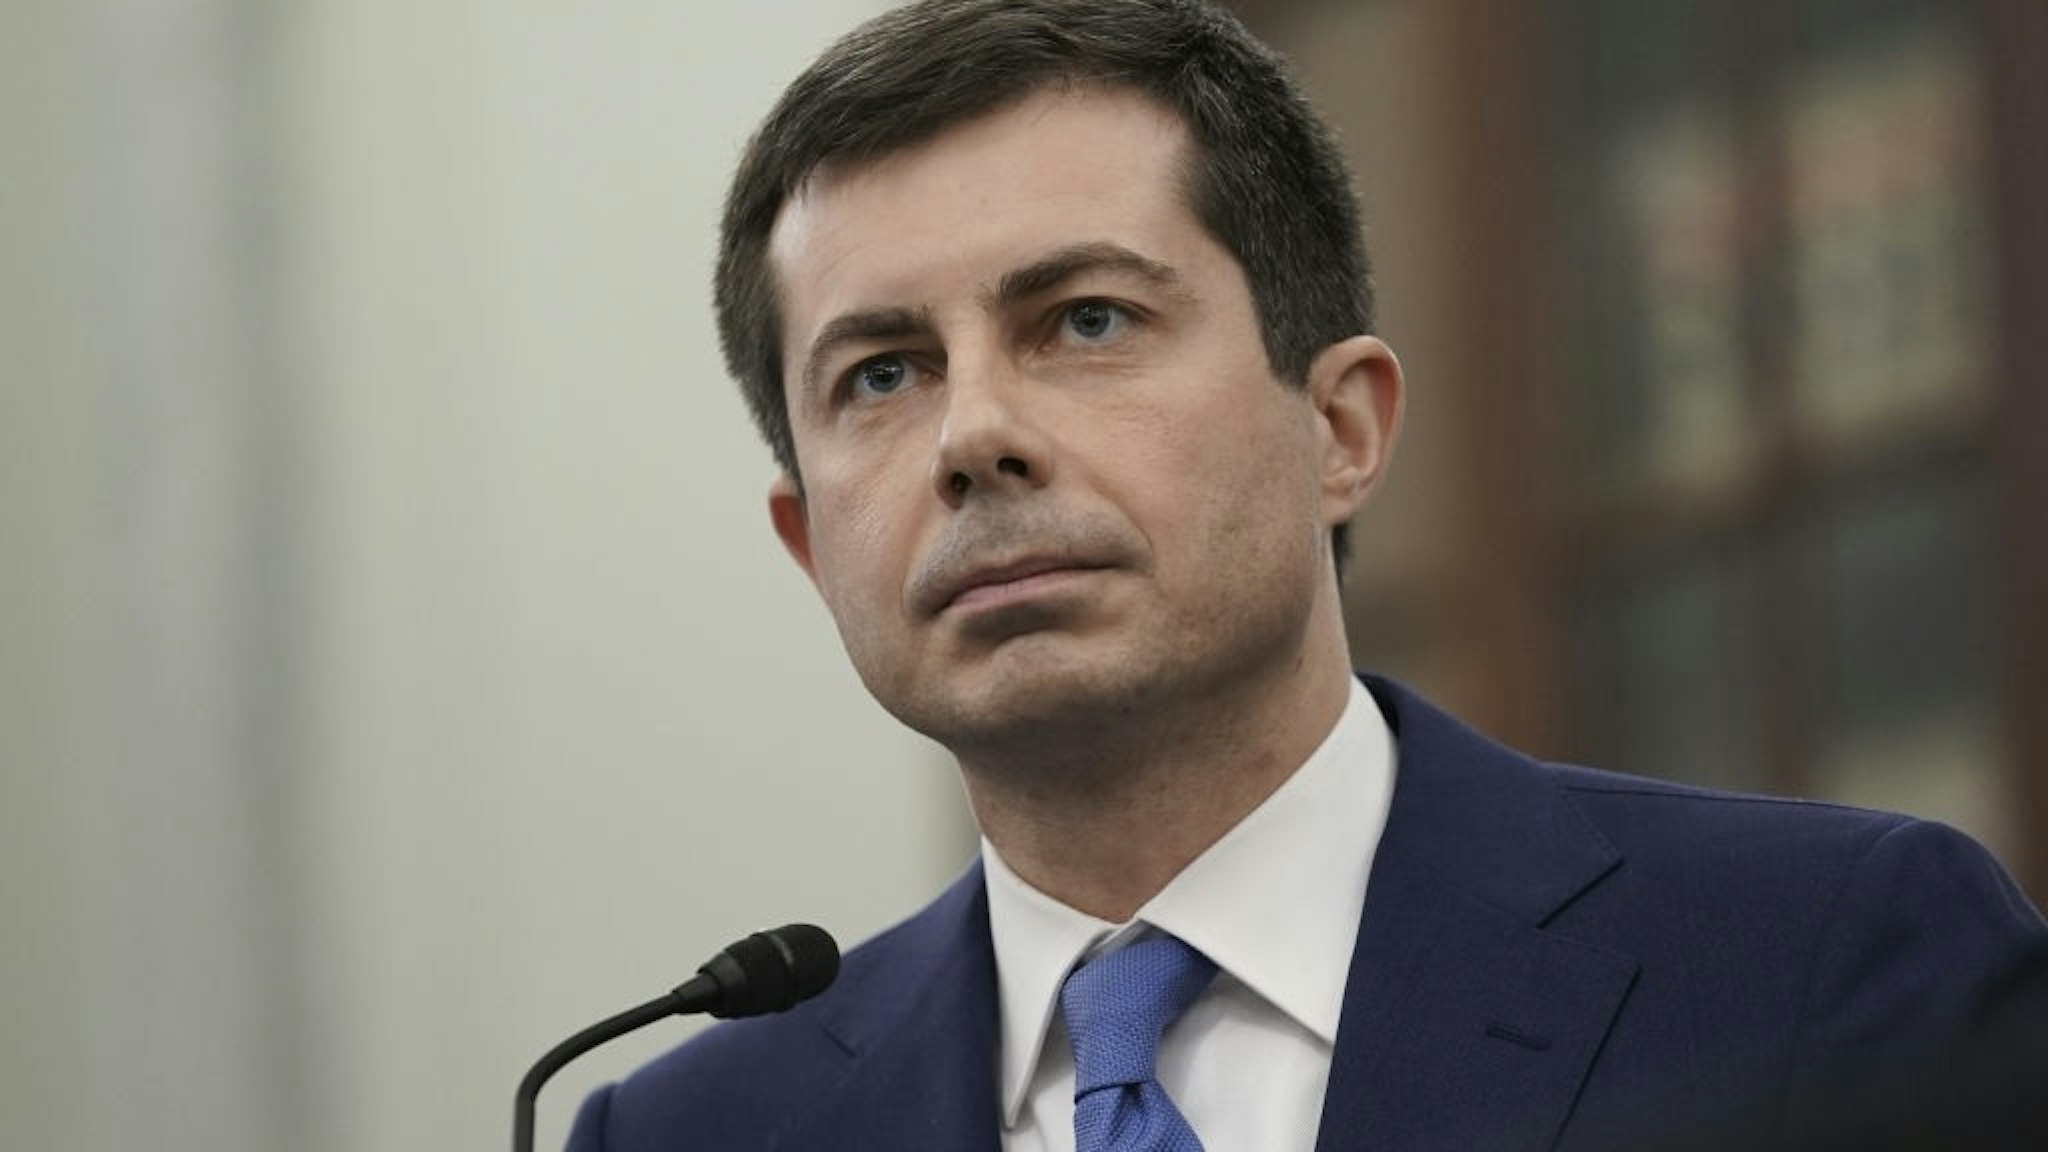 Pete Buttigieg, U.S. secretary of transportation nominee for U.S. President Joe Biden, listens during a Senate Commerce, Science and Transportation Committee confirmation hearing in Washington, D.C., U.S., on Thursday, Jan. 21, 2021. Buttigieg, is pledging to carry out the administration's ambitious agenda to rebuild the n sation's infrastructure, calling it a "generational opportunity" to create new jobs, fight economic inequality and stem climate change. Photographer: Stefani Reynolds/Bloomberg